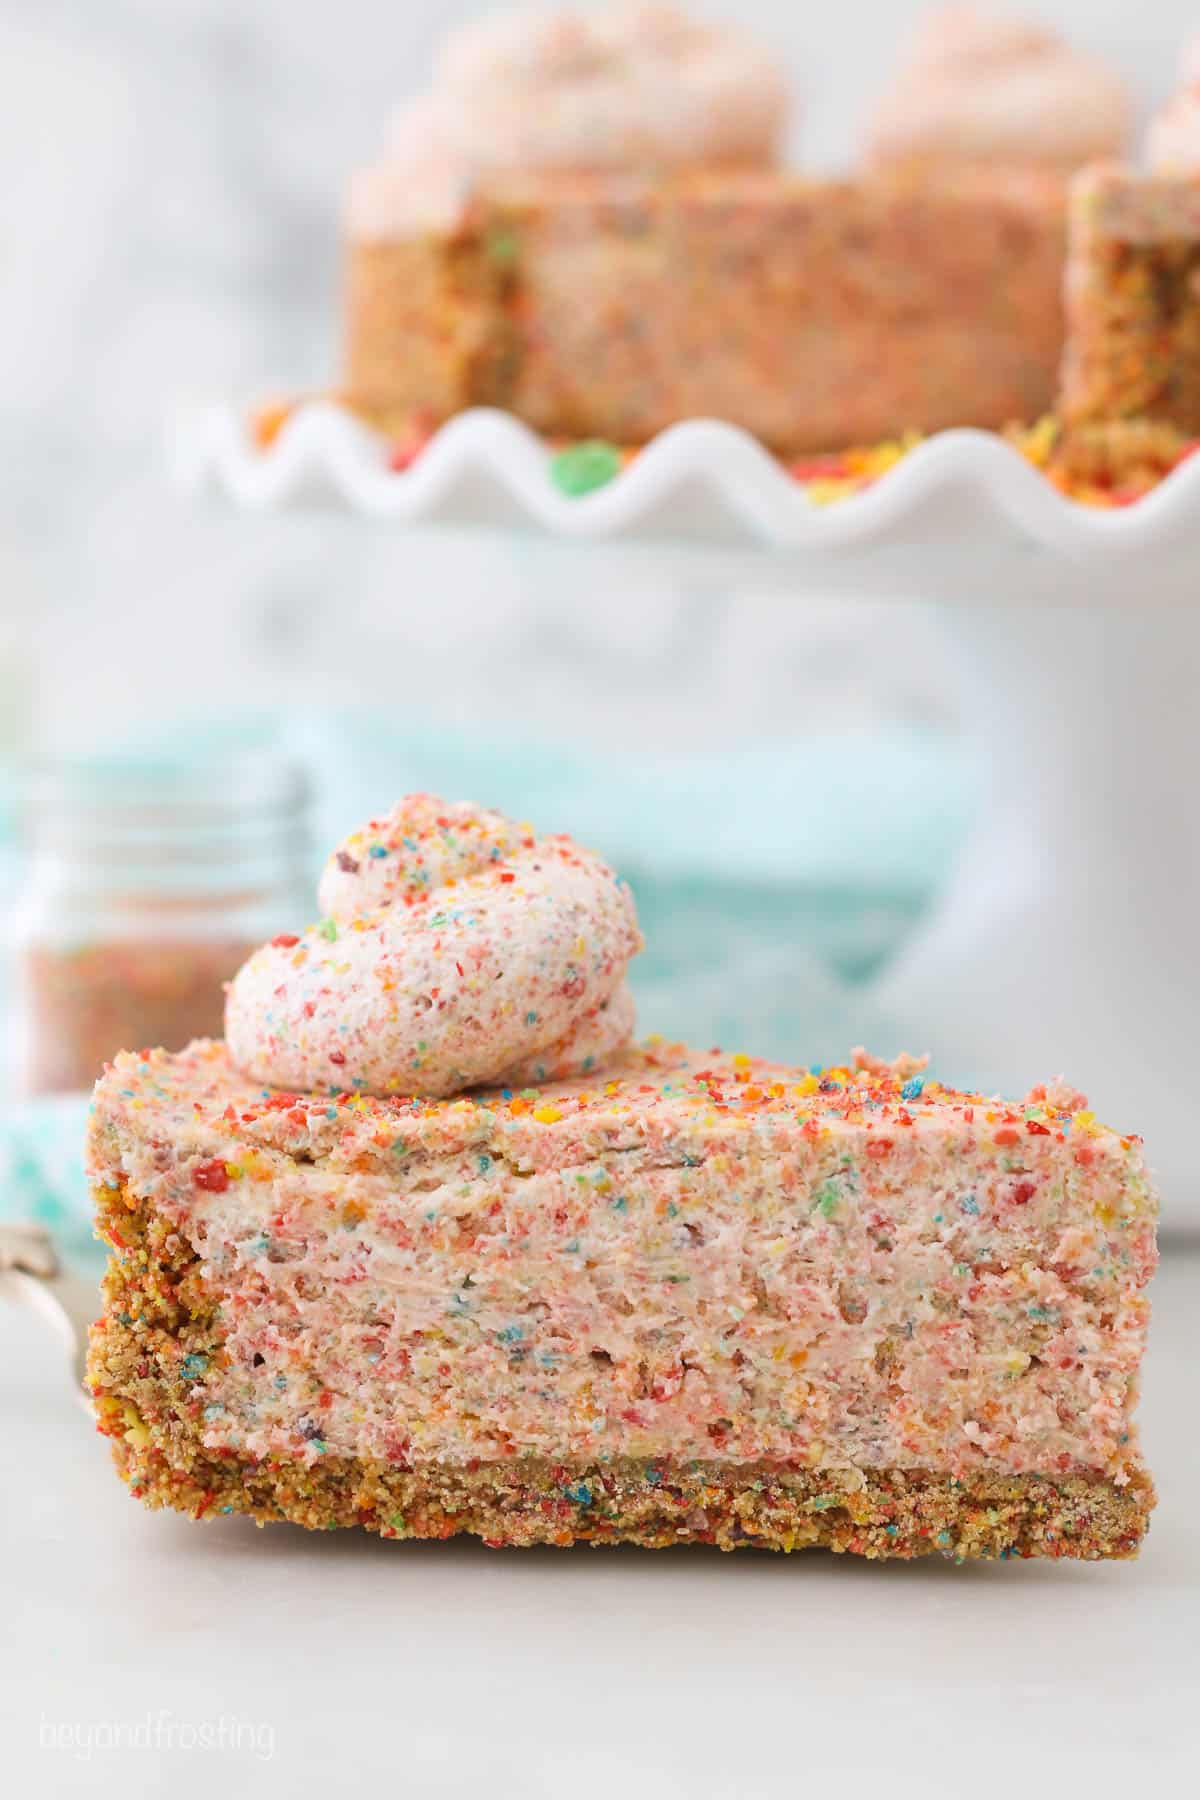 A slice of fruity pebbles cheesecake in front of a cake stand